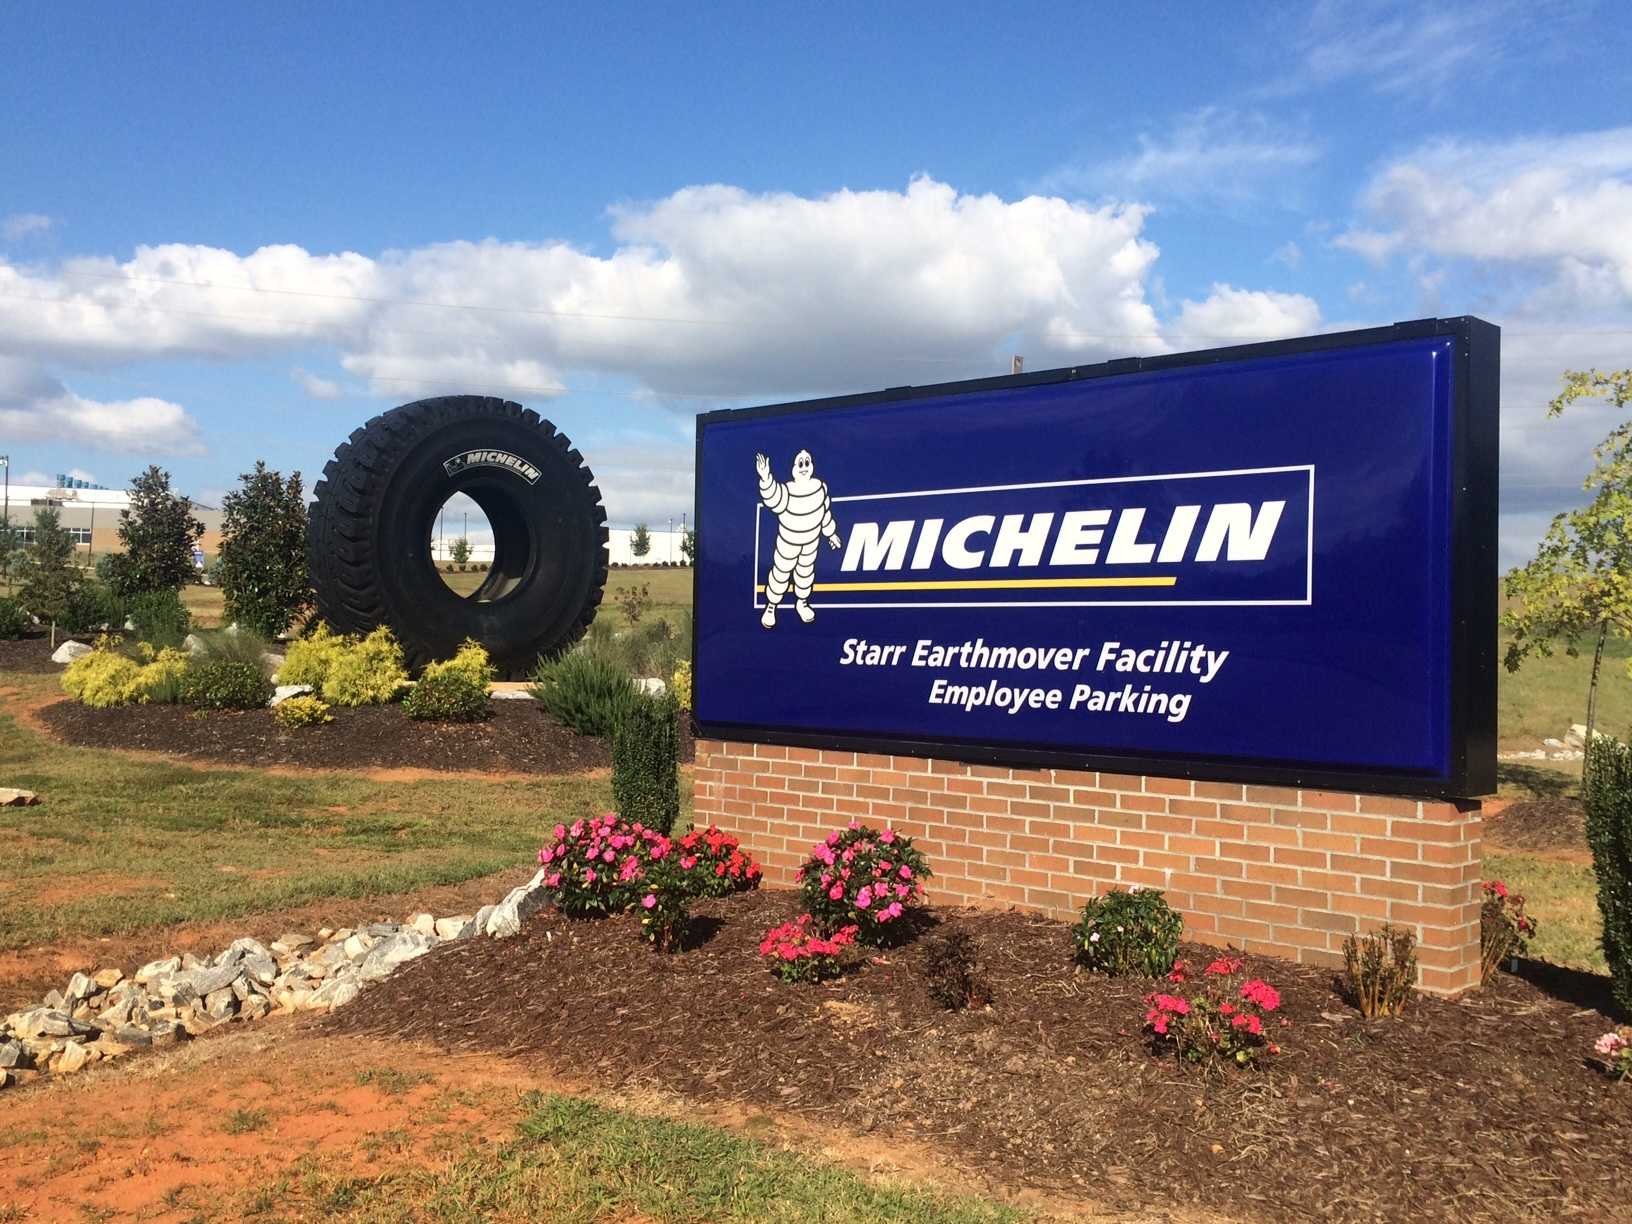 Michelin to suspend operations at Upstate plant, affecting 100 employees